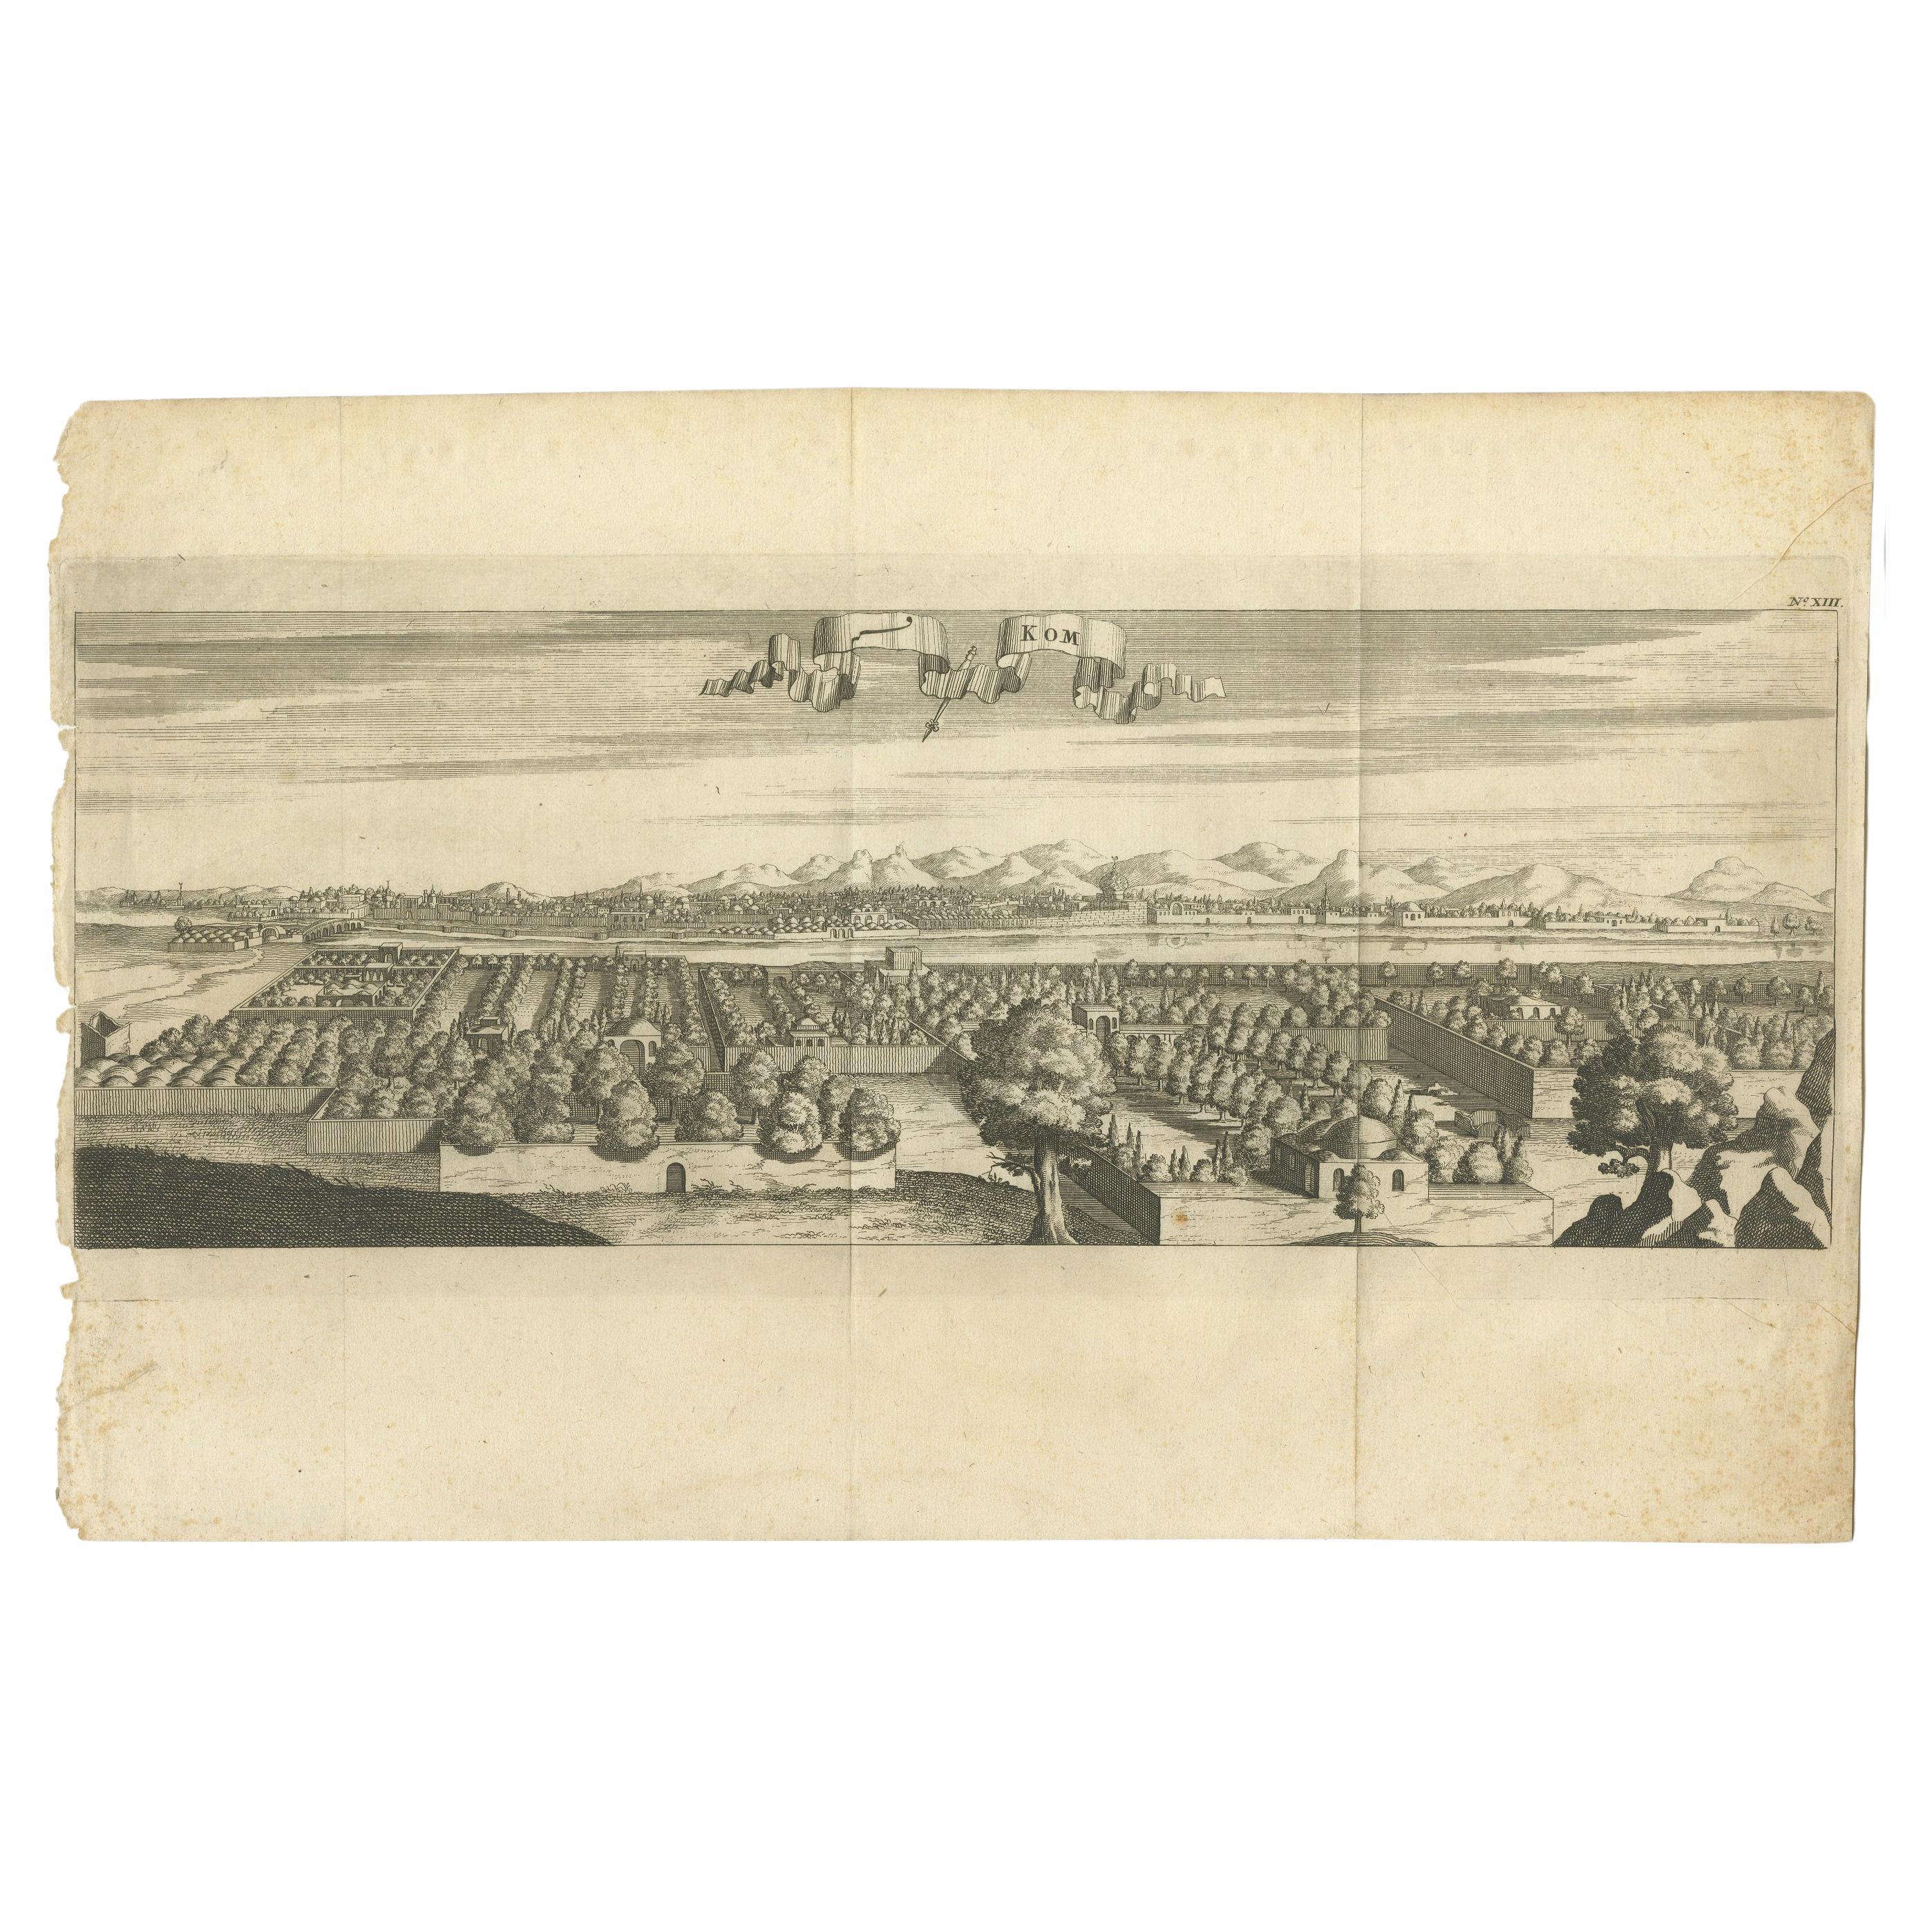 This is an original antique print of the city of Kom in Egypt.